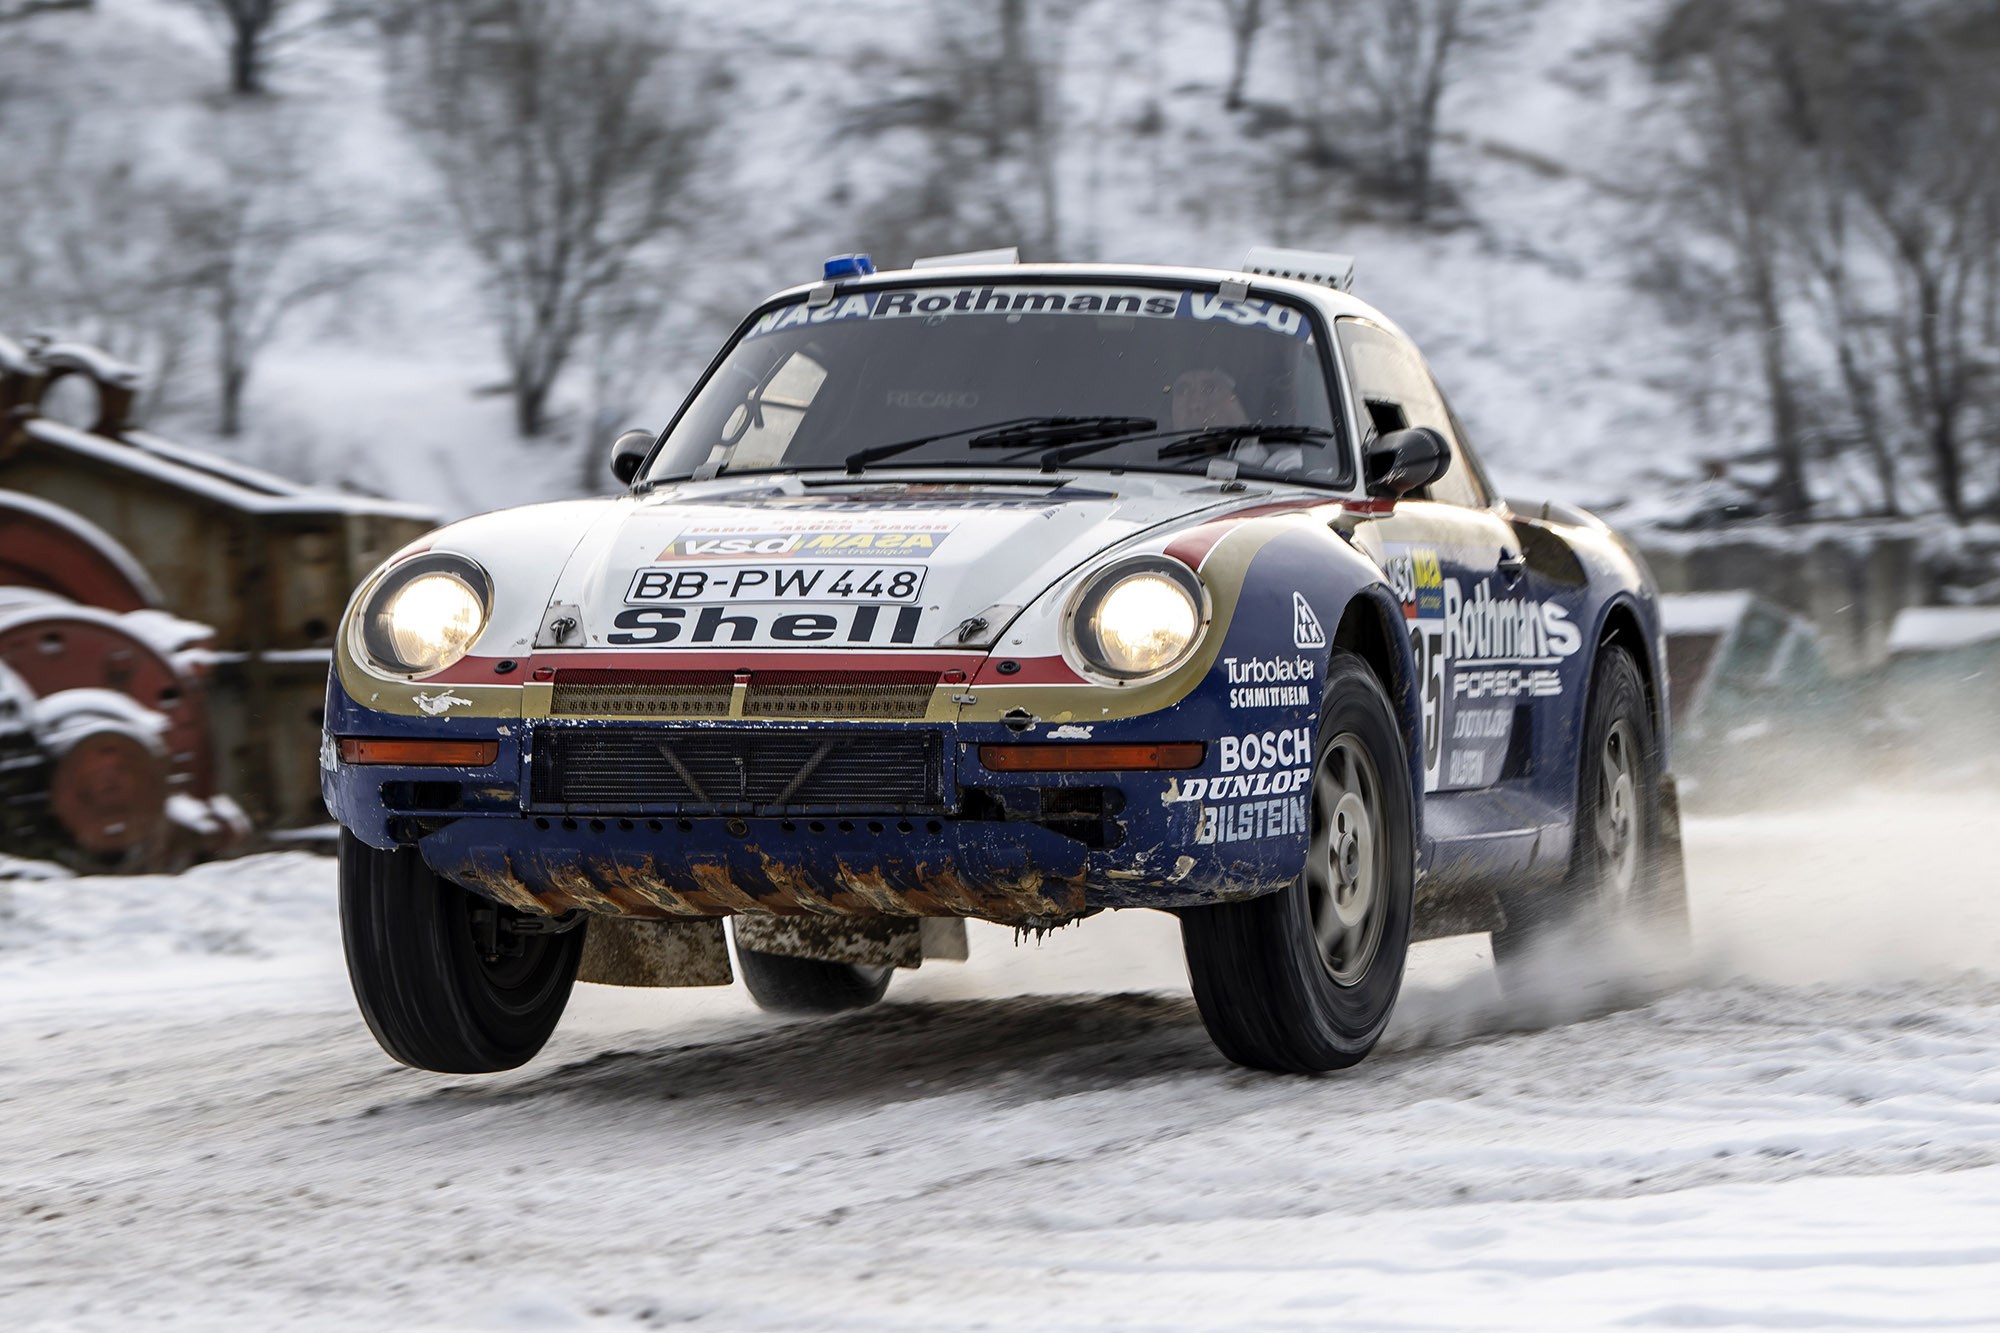 Porsche 959 rally car wearing a race livery driving in the snow